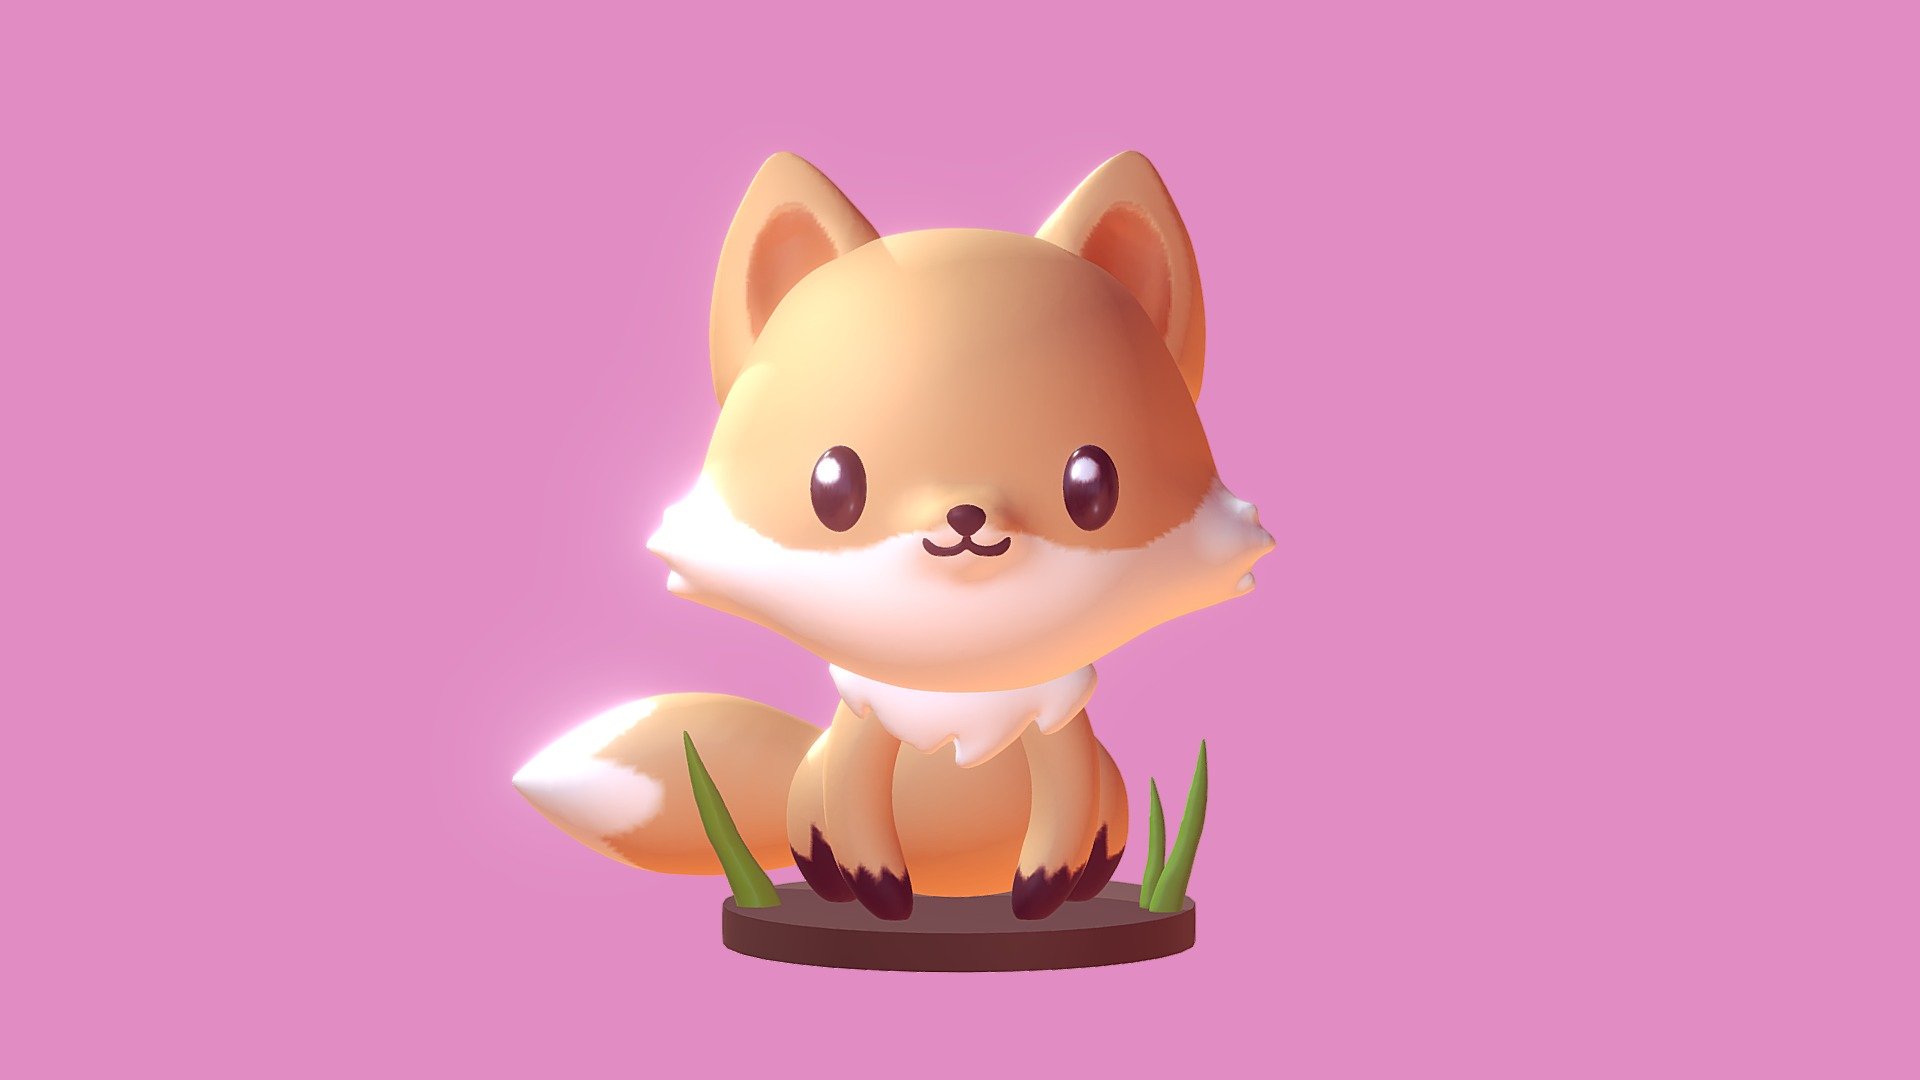 If you used my model, please do tag me on ig @vharmeleon, I would love to see your creation with it! 😆

❌For non-comercial use only❌
A cute fox using a refrence from other's work 3d model